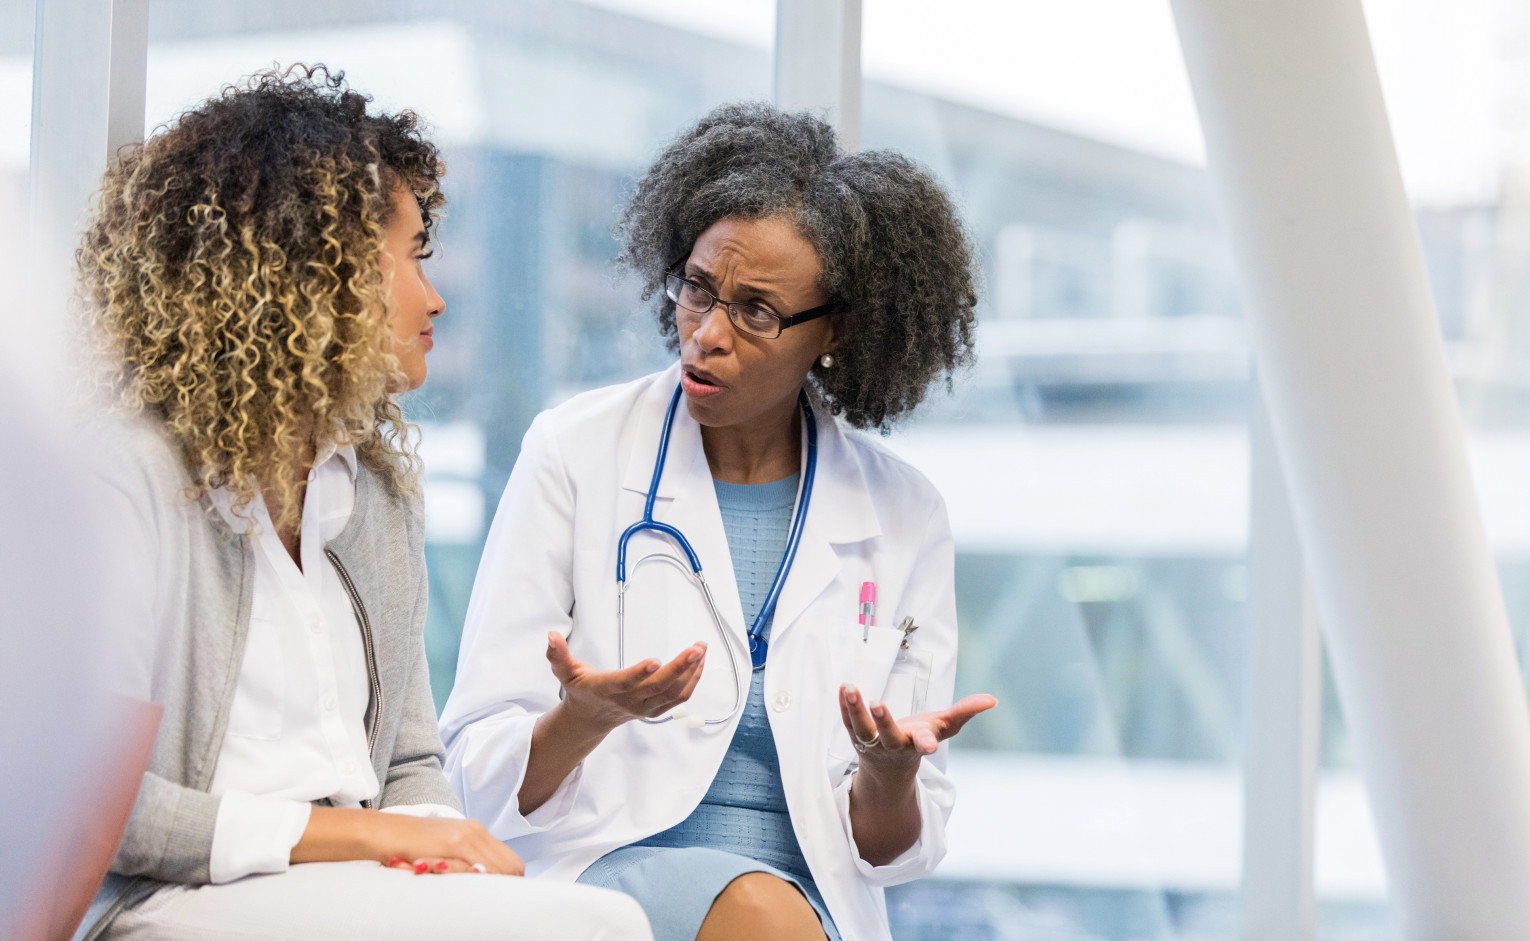 BD released findings from a survey conducted by The Harris Poll that indicate a significant gap in women’s knowledge about the primary causes of cervical cancer as well as the most effective means of prevention.